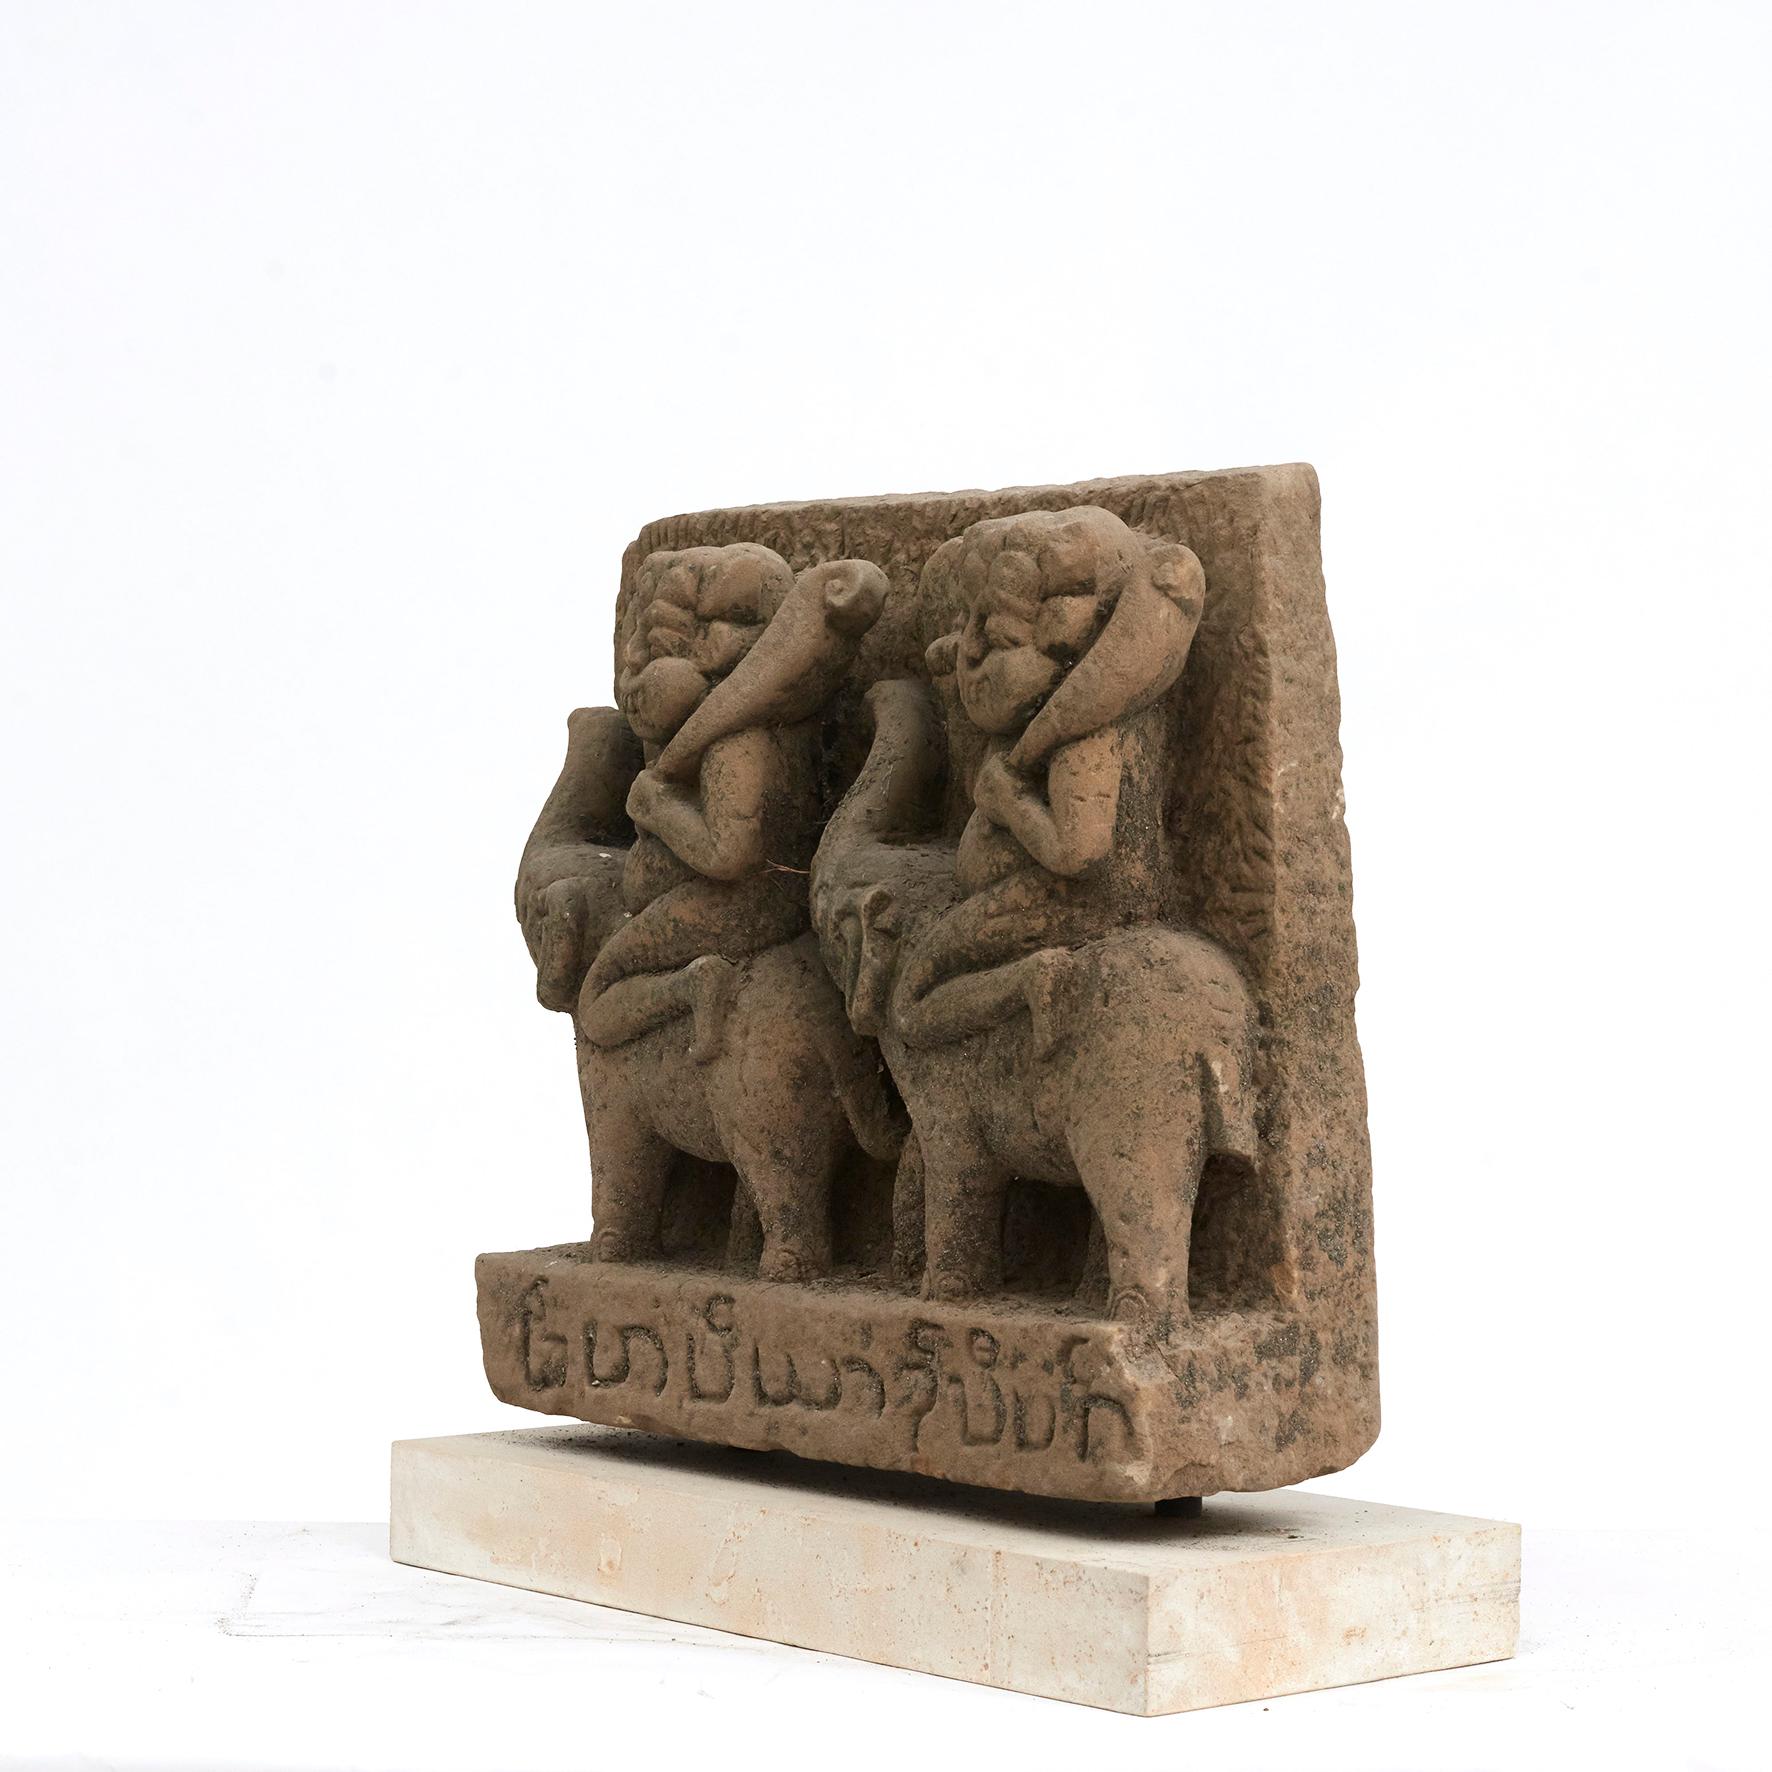 500-600 year old sandstone carving. The sculpture is depicting 'Two demons riding on elephants'. 
From Buddha pagoda / temple in Arakan, Burma, 1400-1500.

Untouched and in original condition with great patina. Mounted on light sandstone